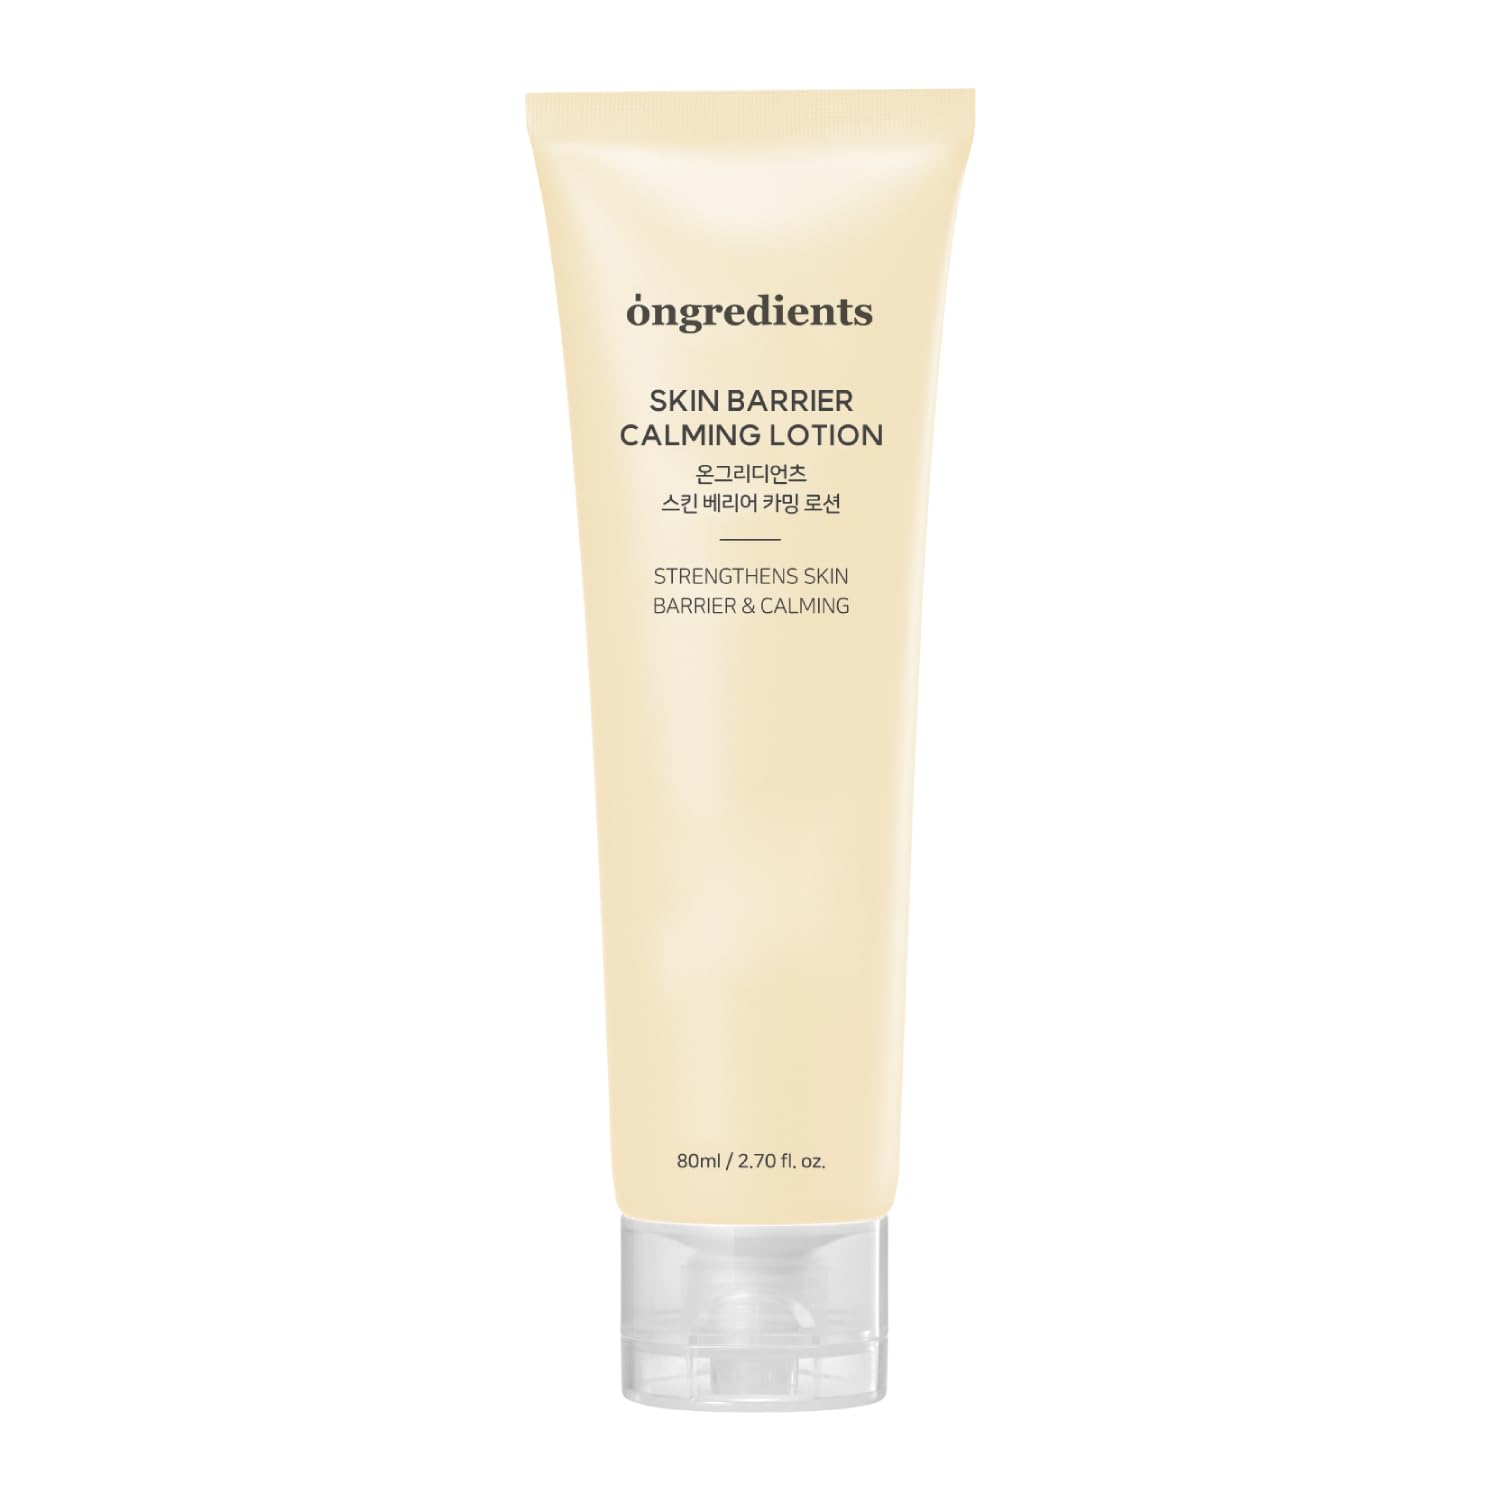 Ongredients Centella Asiatica Skin Barrier Calming Lotion